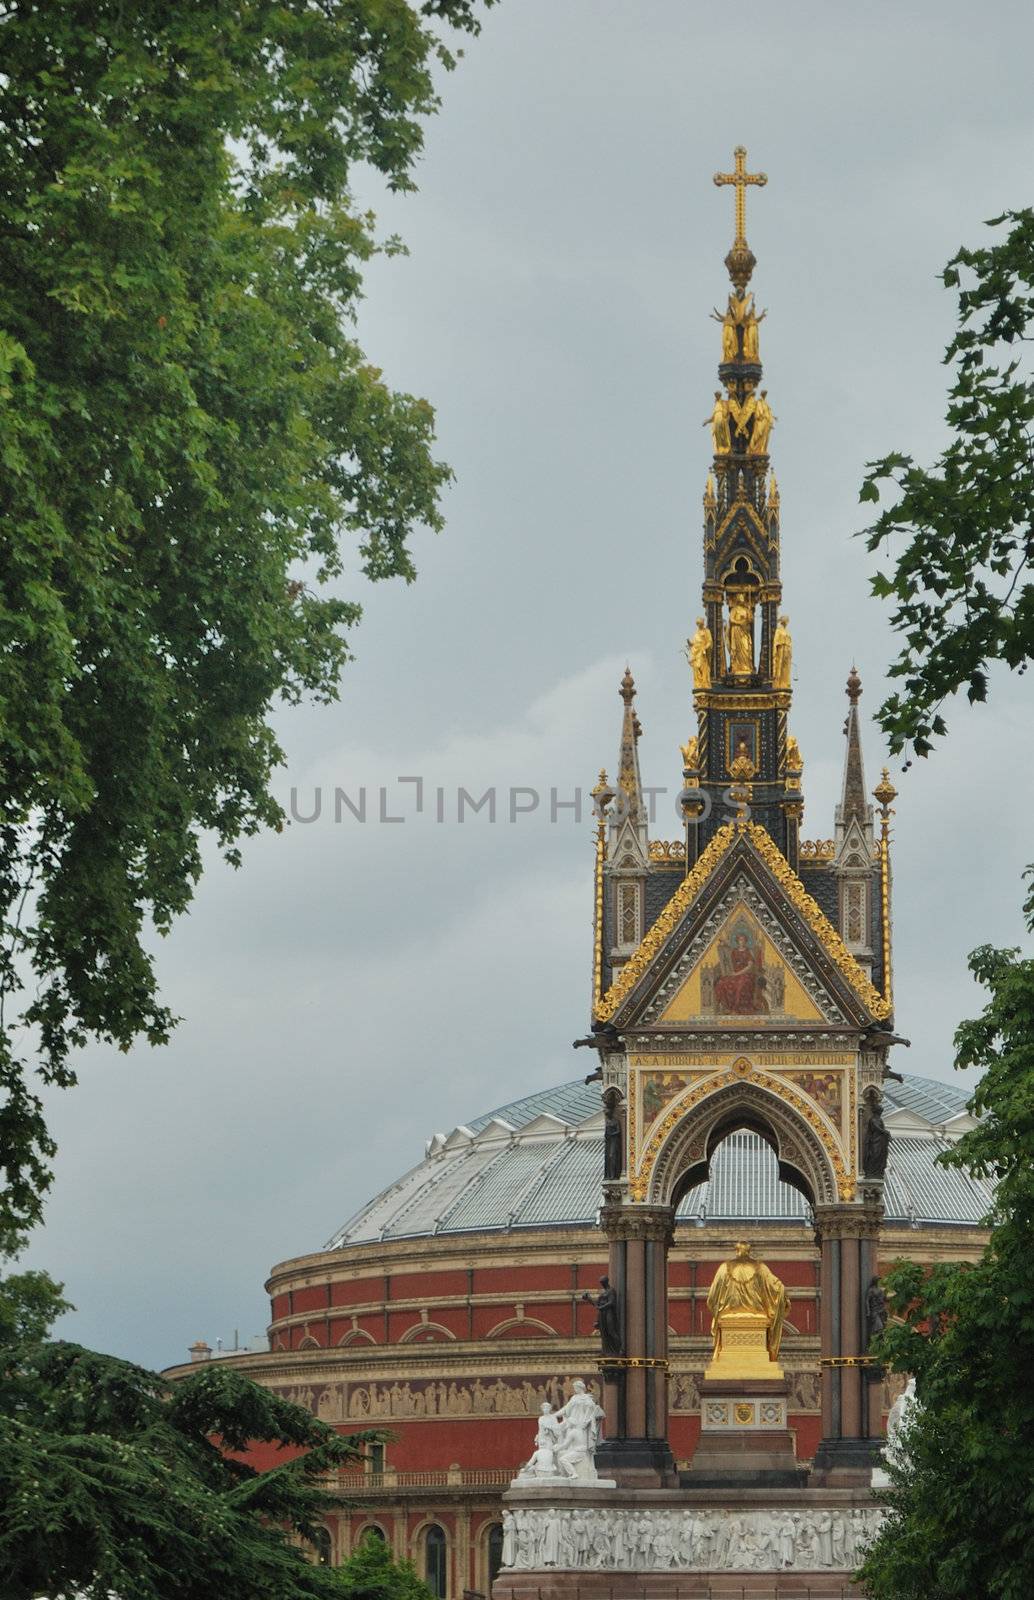 albert hall from memorial by pauws99